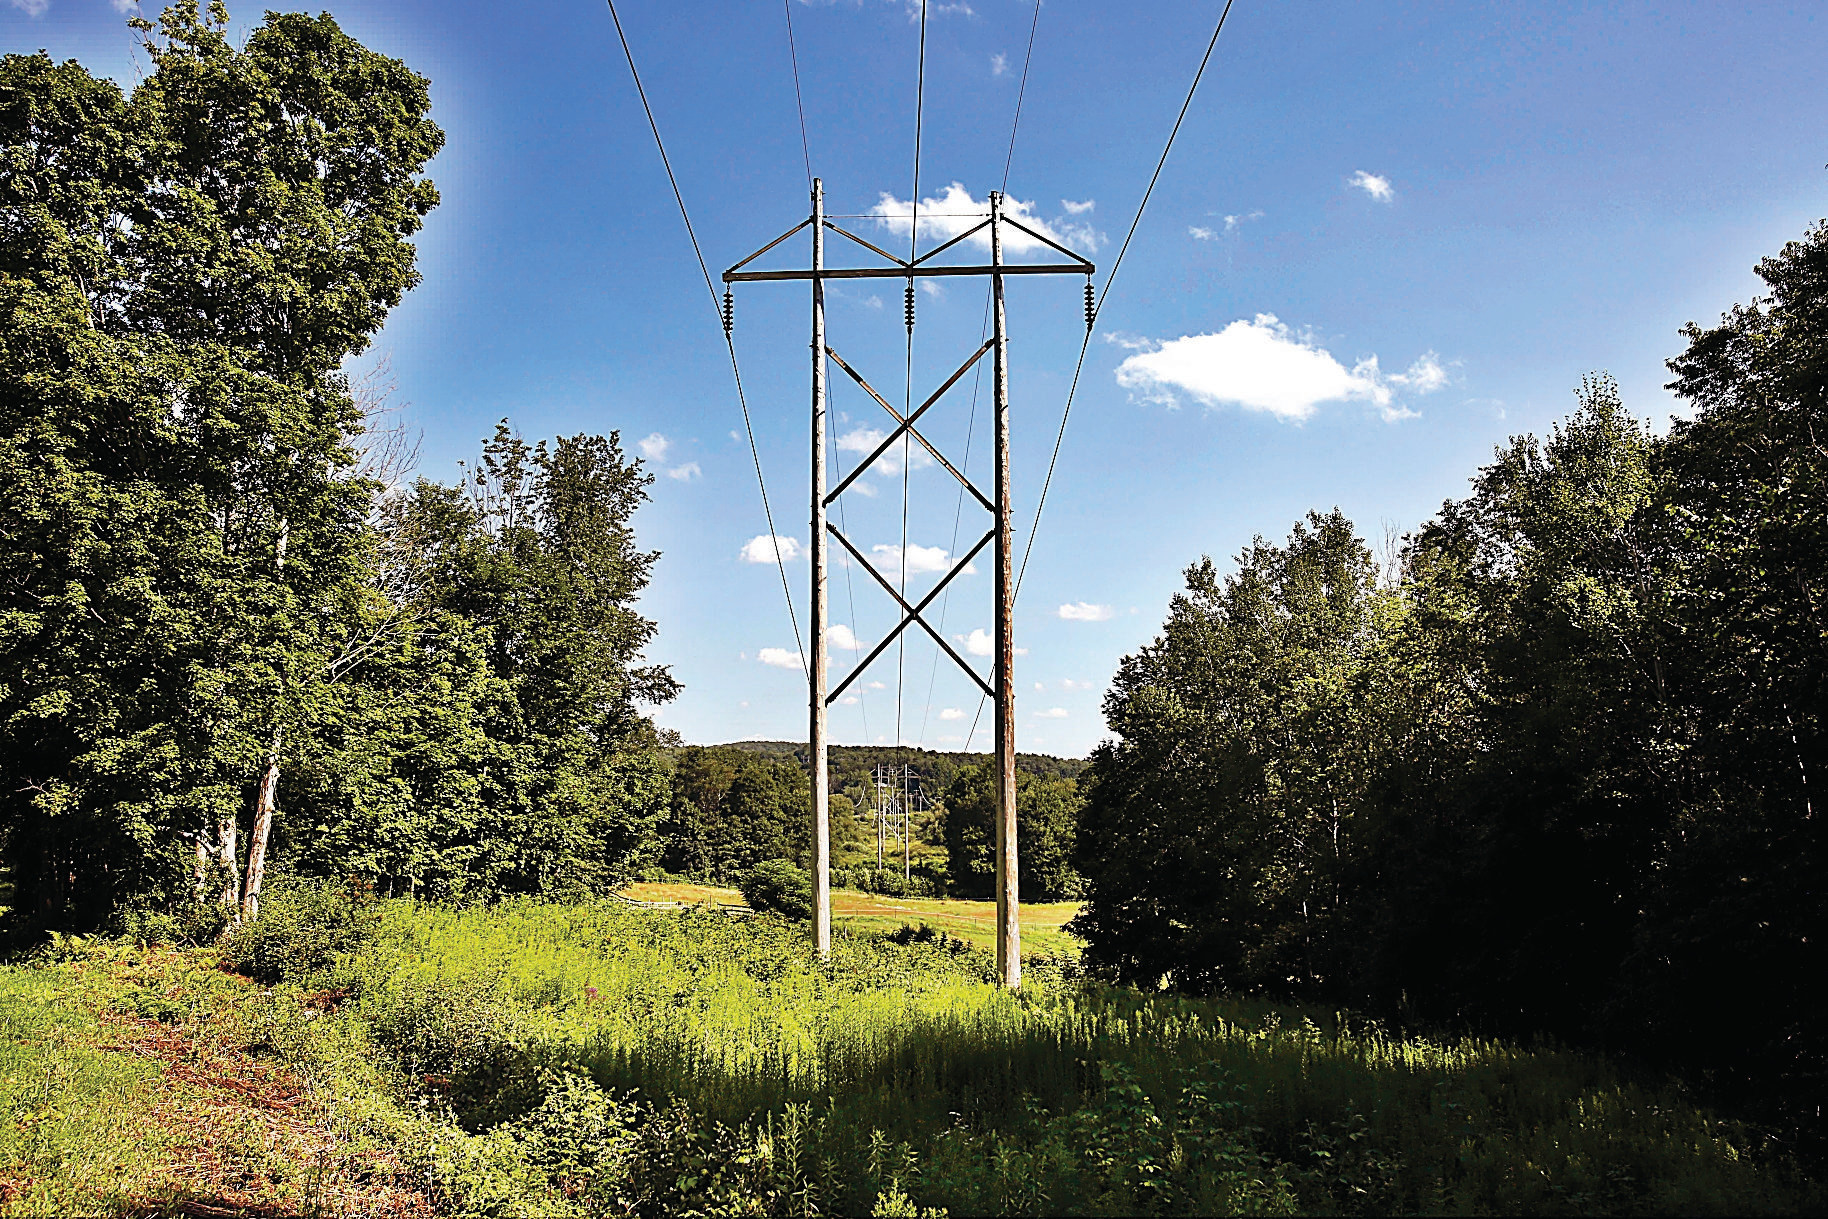 New power lines might bring renewable energy: Landowners, towns ...